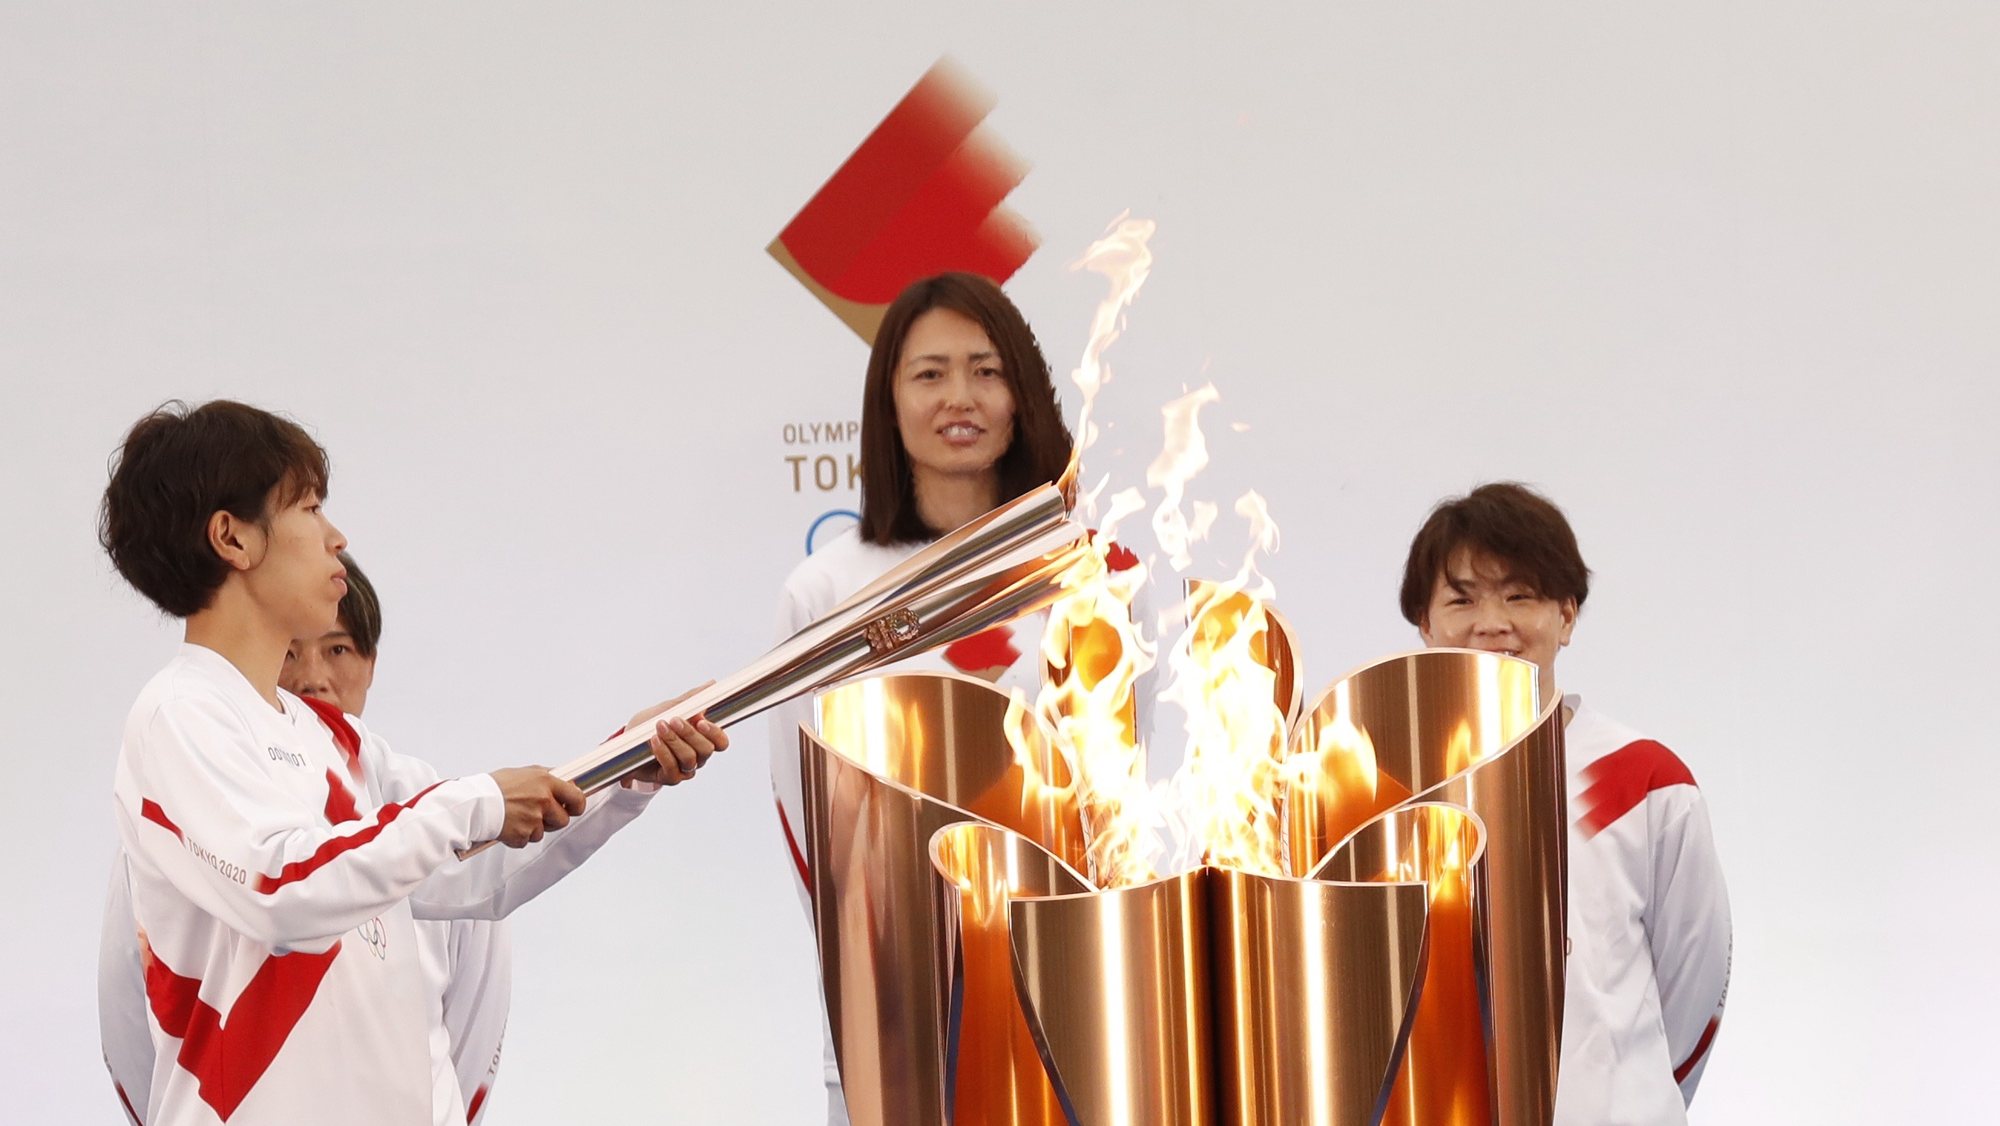 epa09095217 The Olympic torch is lit by a member of Japan&#039;s women&#039;s national soccer team Nadeshiko Japan during the Tokyo 2020 Olympic Torch Relay Grand Start in Naraha, Fukushima prefecture, Japan, 25 March 2021. The postponed Tokyo 2020 Olympic Games are scheduled to start on 23 July 2021 and some 10,000 torchbearers will run across the country along a 121-day journey.  EPA/KIM KYUNG-HOON / POOL